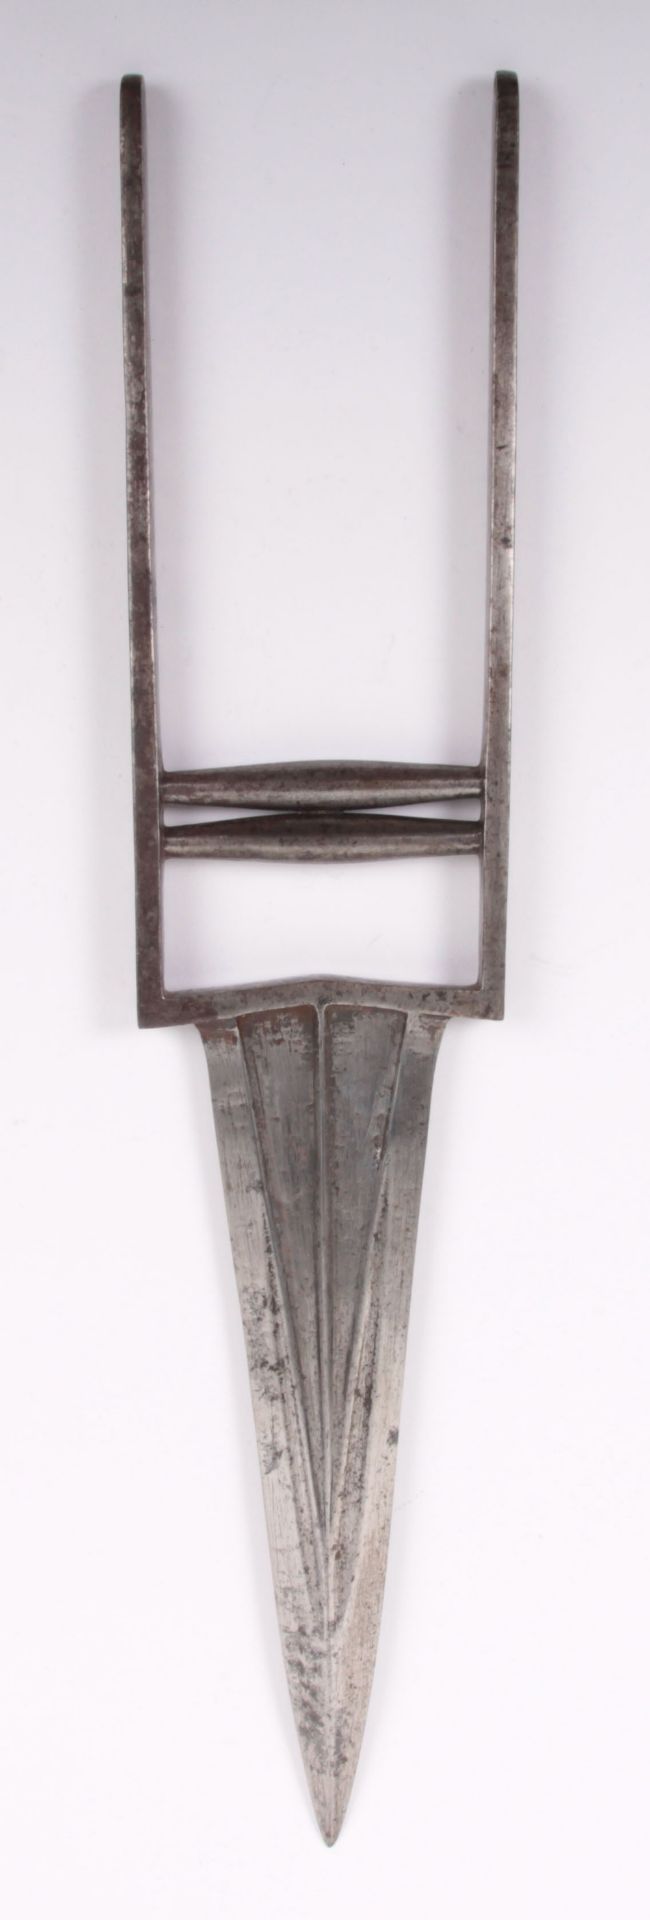 Large and Heavy 17th Century Indian Dagger Katar - Image 2 of 12